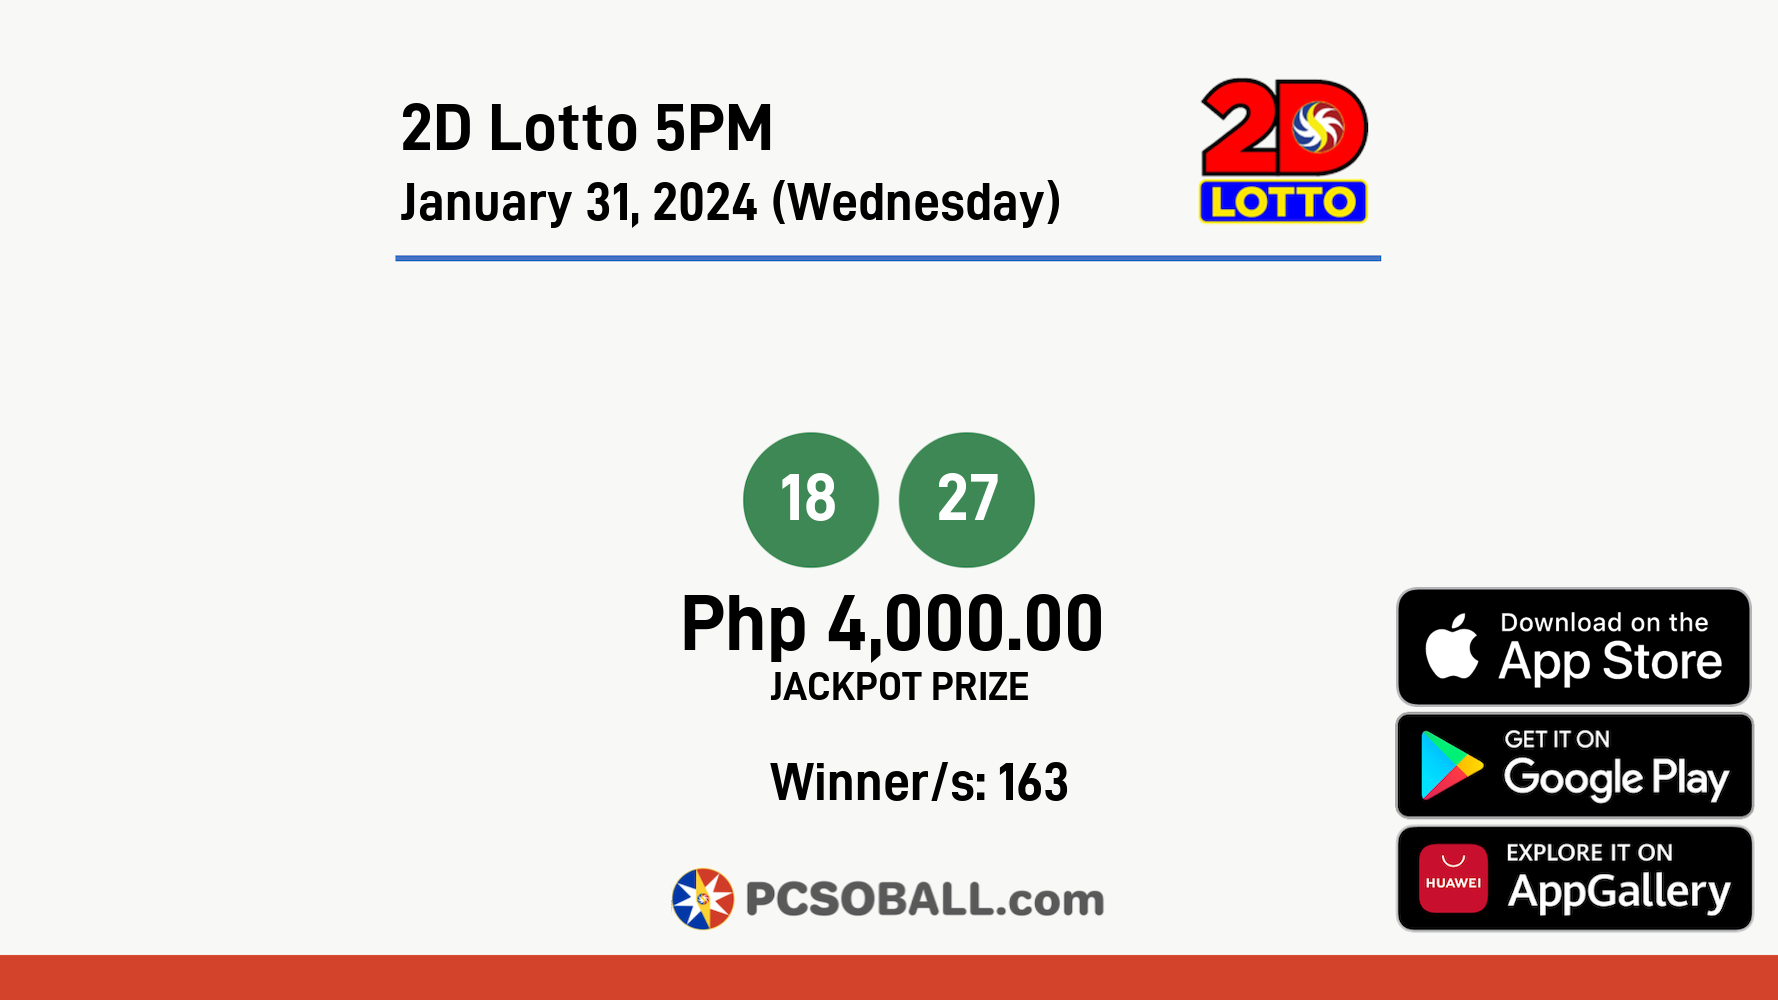 2D Lotto 5PM January 31, 2024 (Wednesday) Result